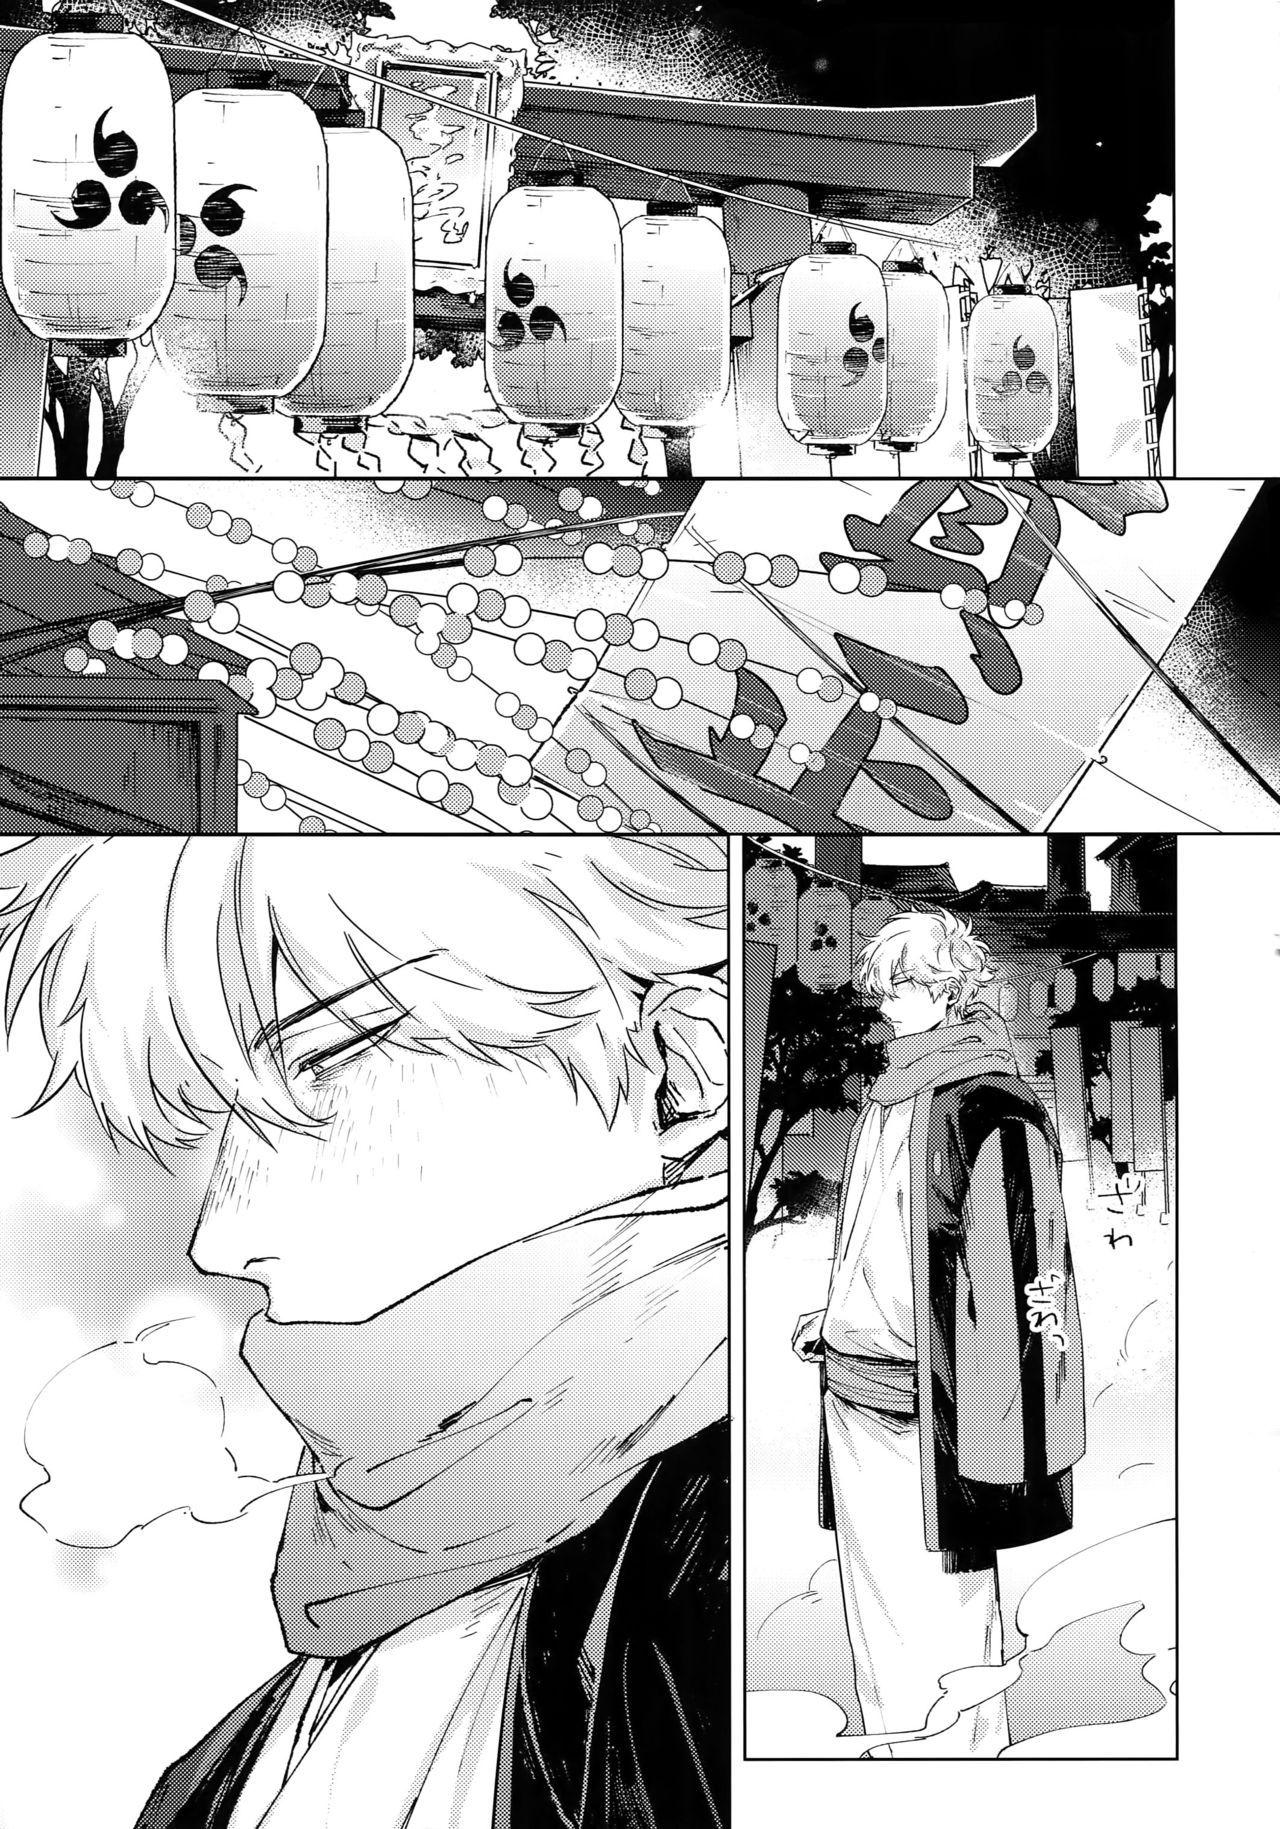 Real Amatuer Porn By My Side - Gintama Cream - Page 4